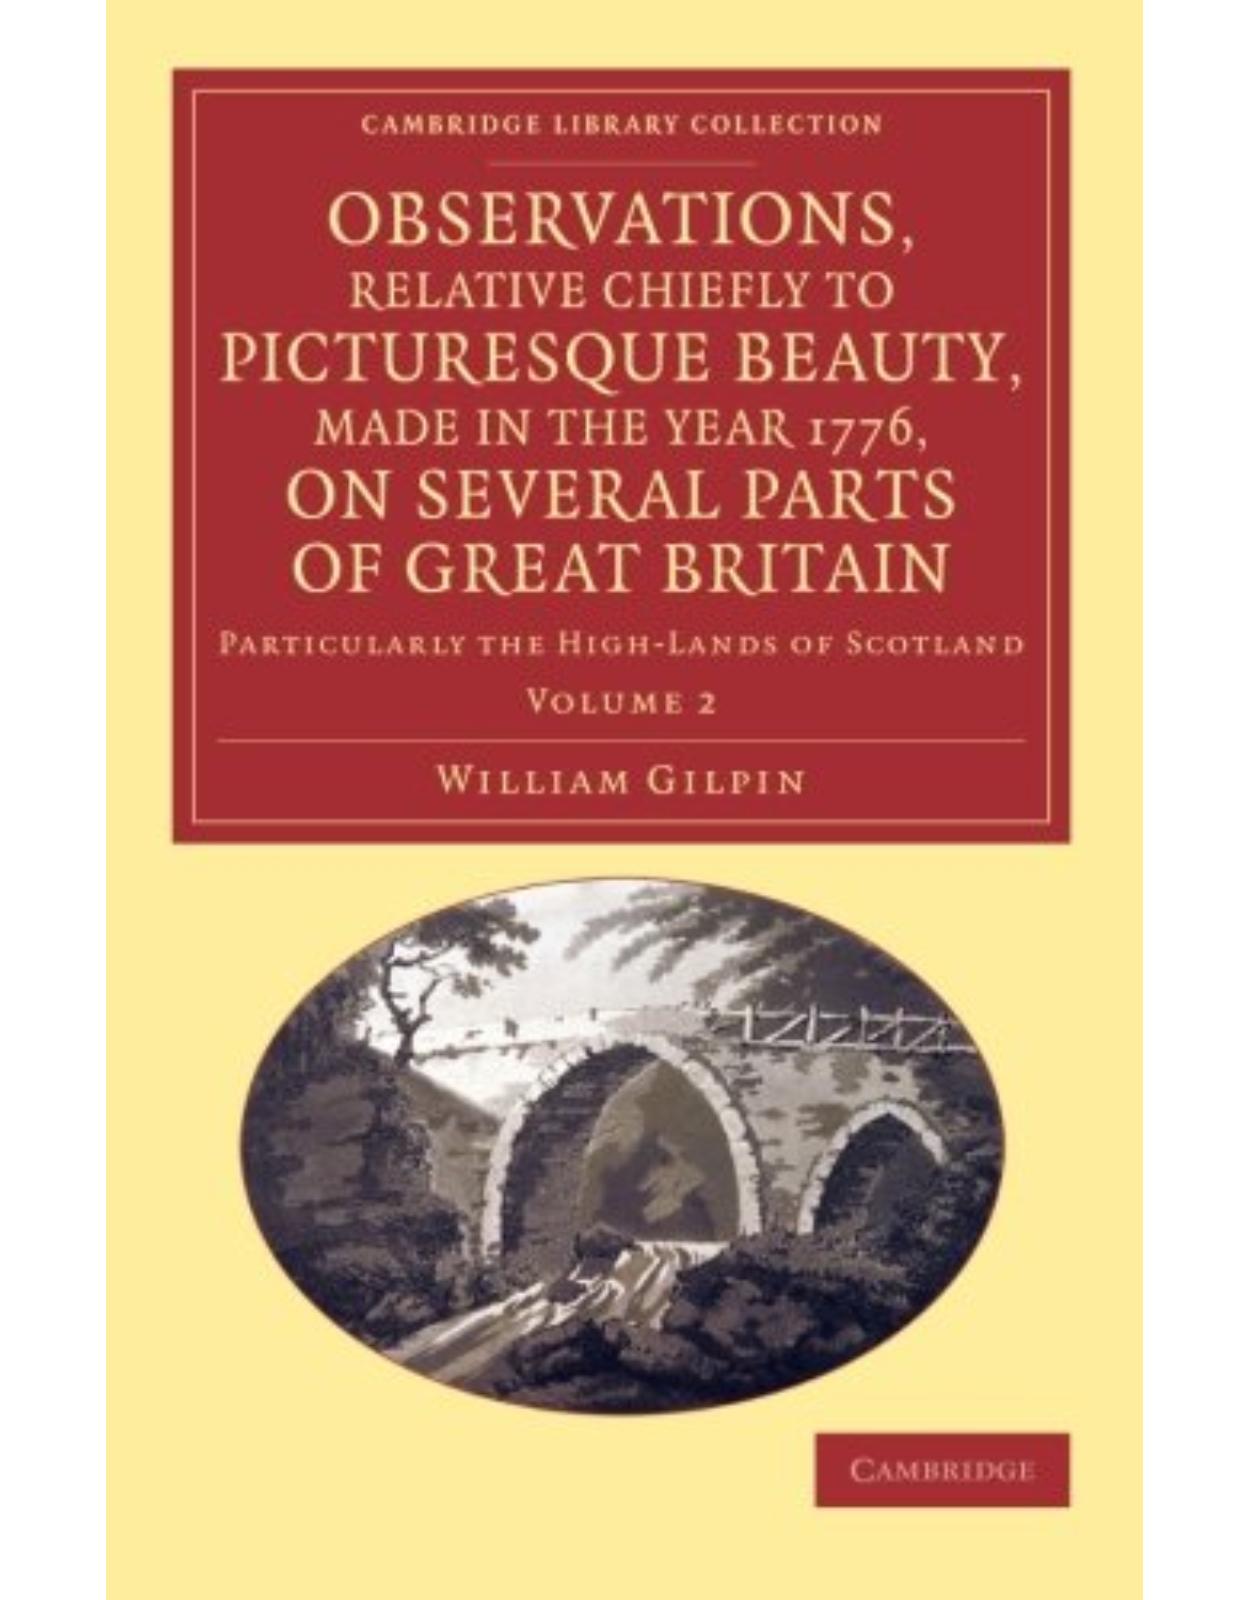 Observations, Relative Chiefly to Picturesque Beauty, Made in the Year 1776, on Several Parts of Great Britain 2 Volume Set: Particularly the High-Lands of Scotland